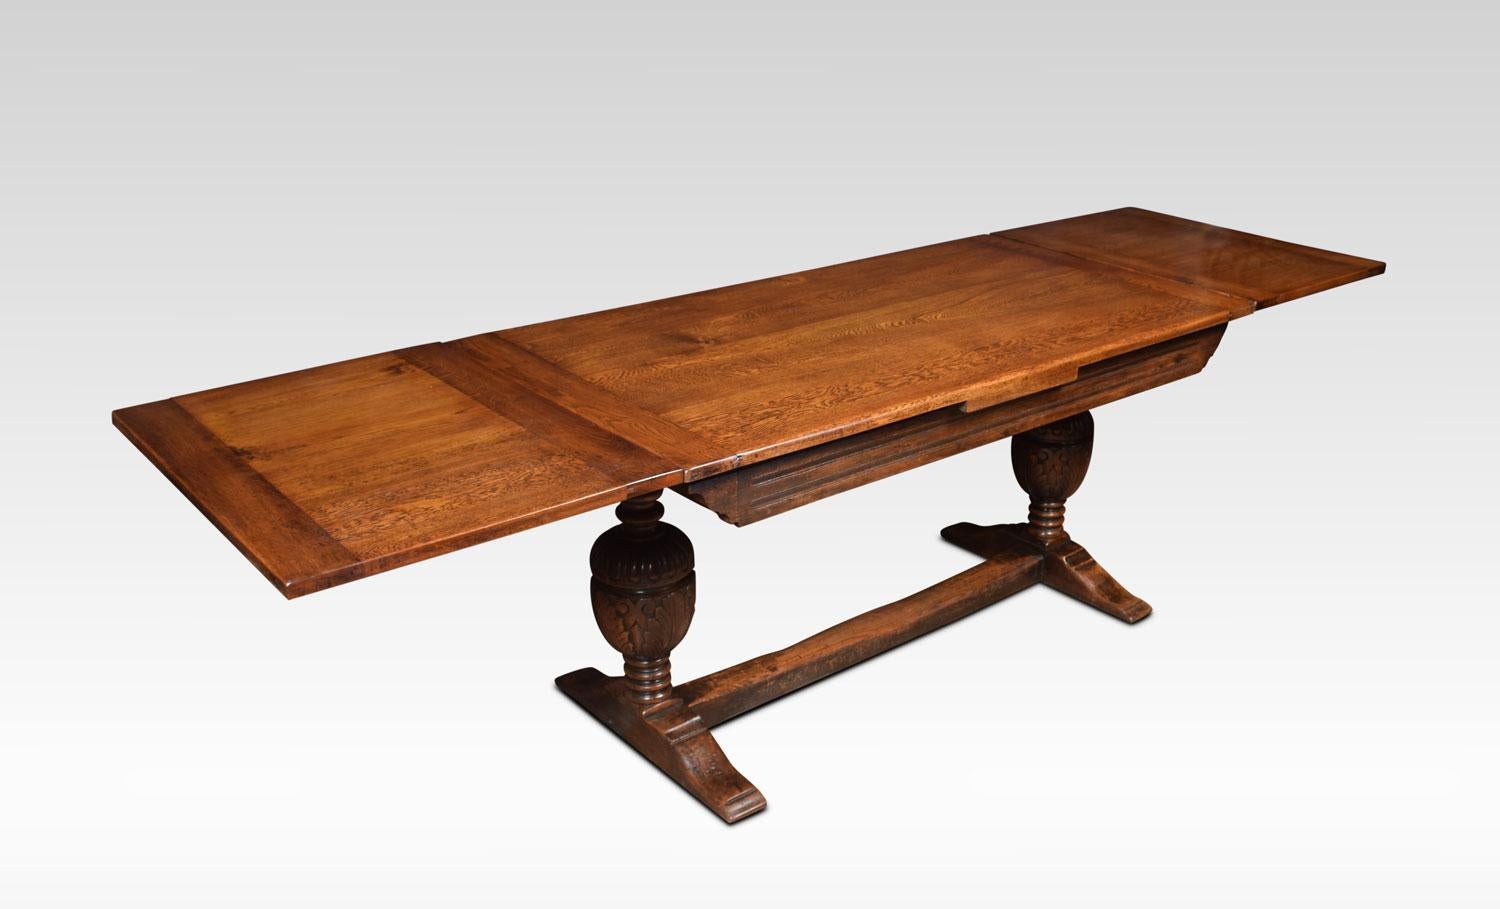 Oak draw leaf refectory table, the rectangular solid oak top having pullout / pull-out ends. Above carved bulbous cup and cover supports united by a stretcher.
Dimensions:
Height 30 inches
Width 60 inches when open 107.5 inches
Depth 31.5 inches.